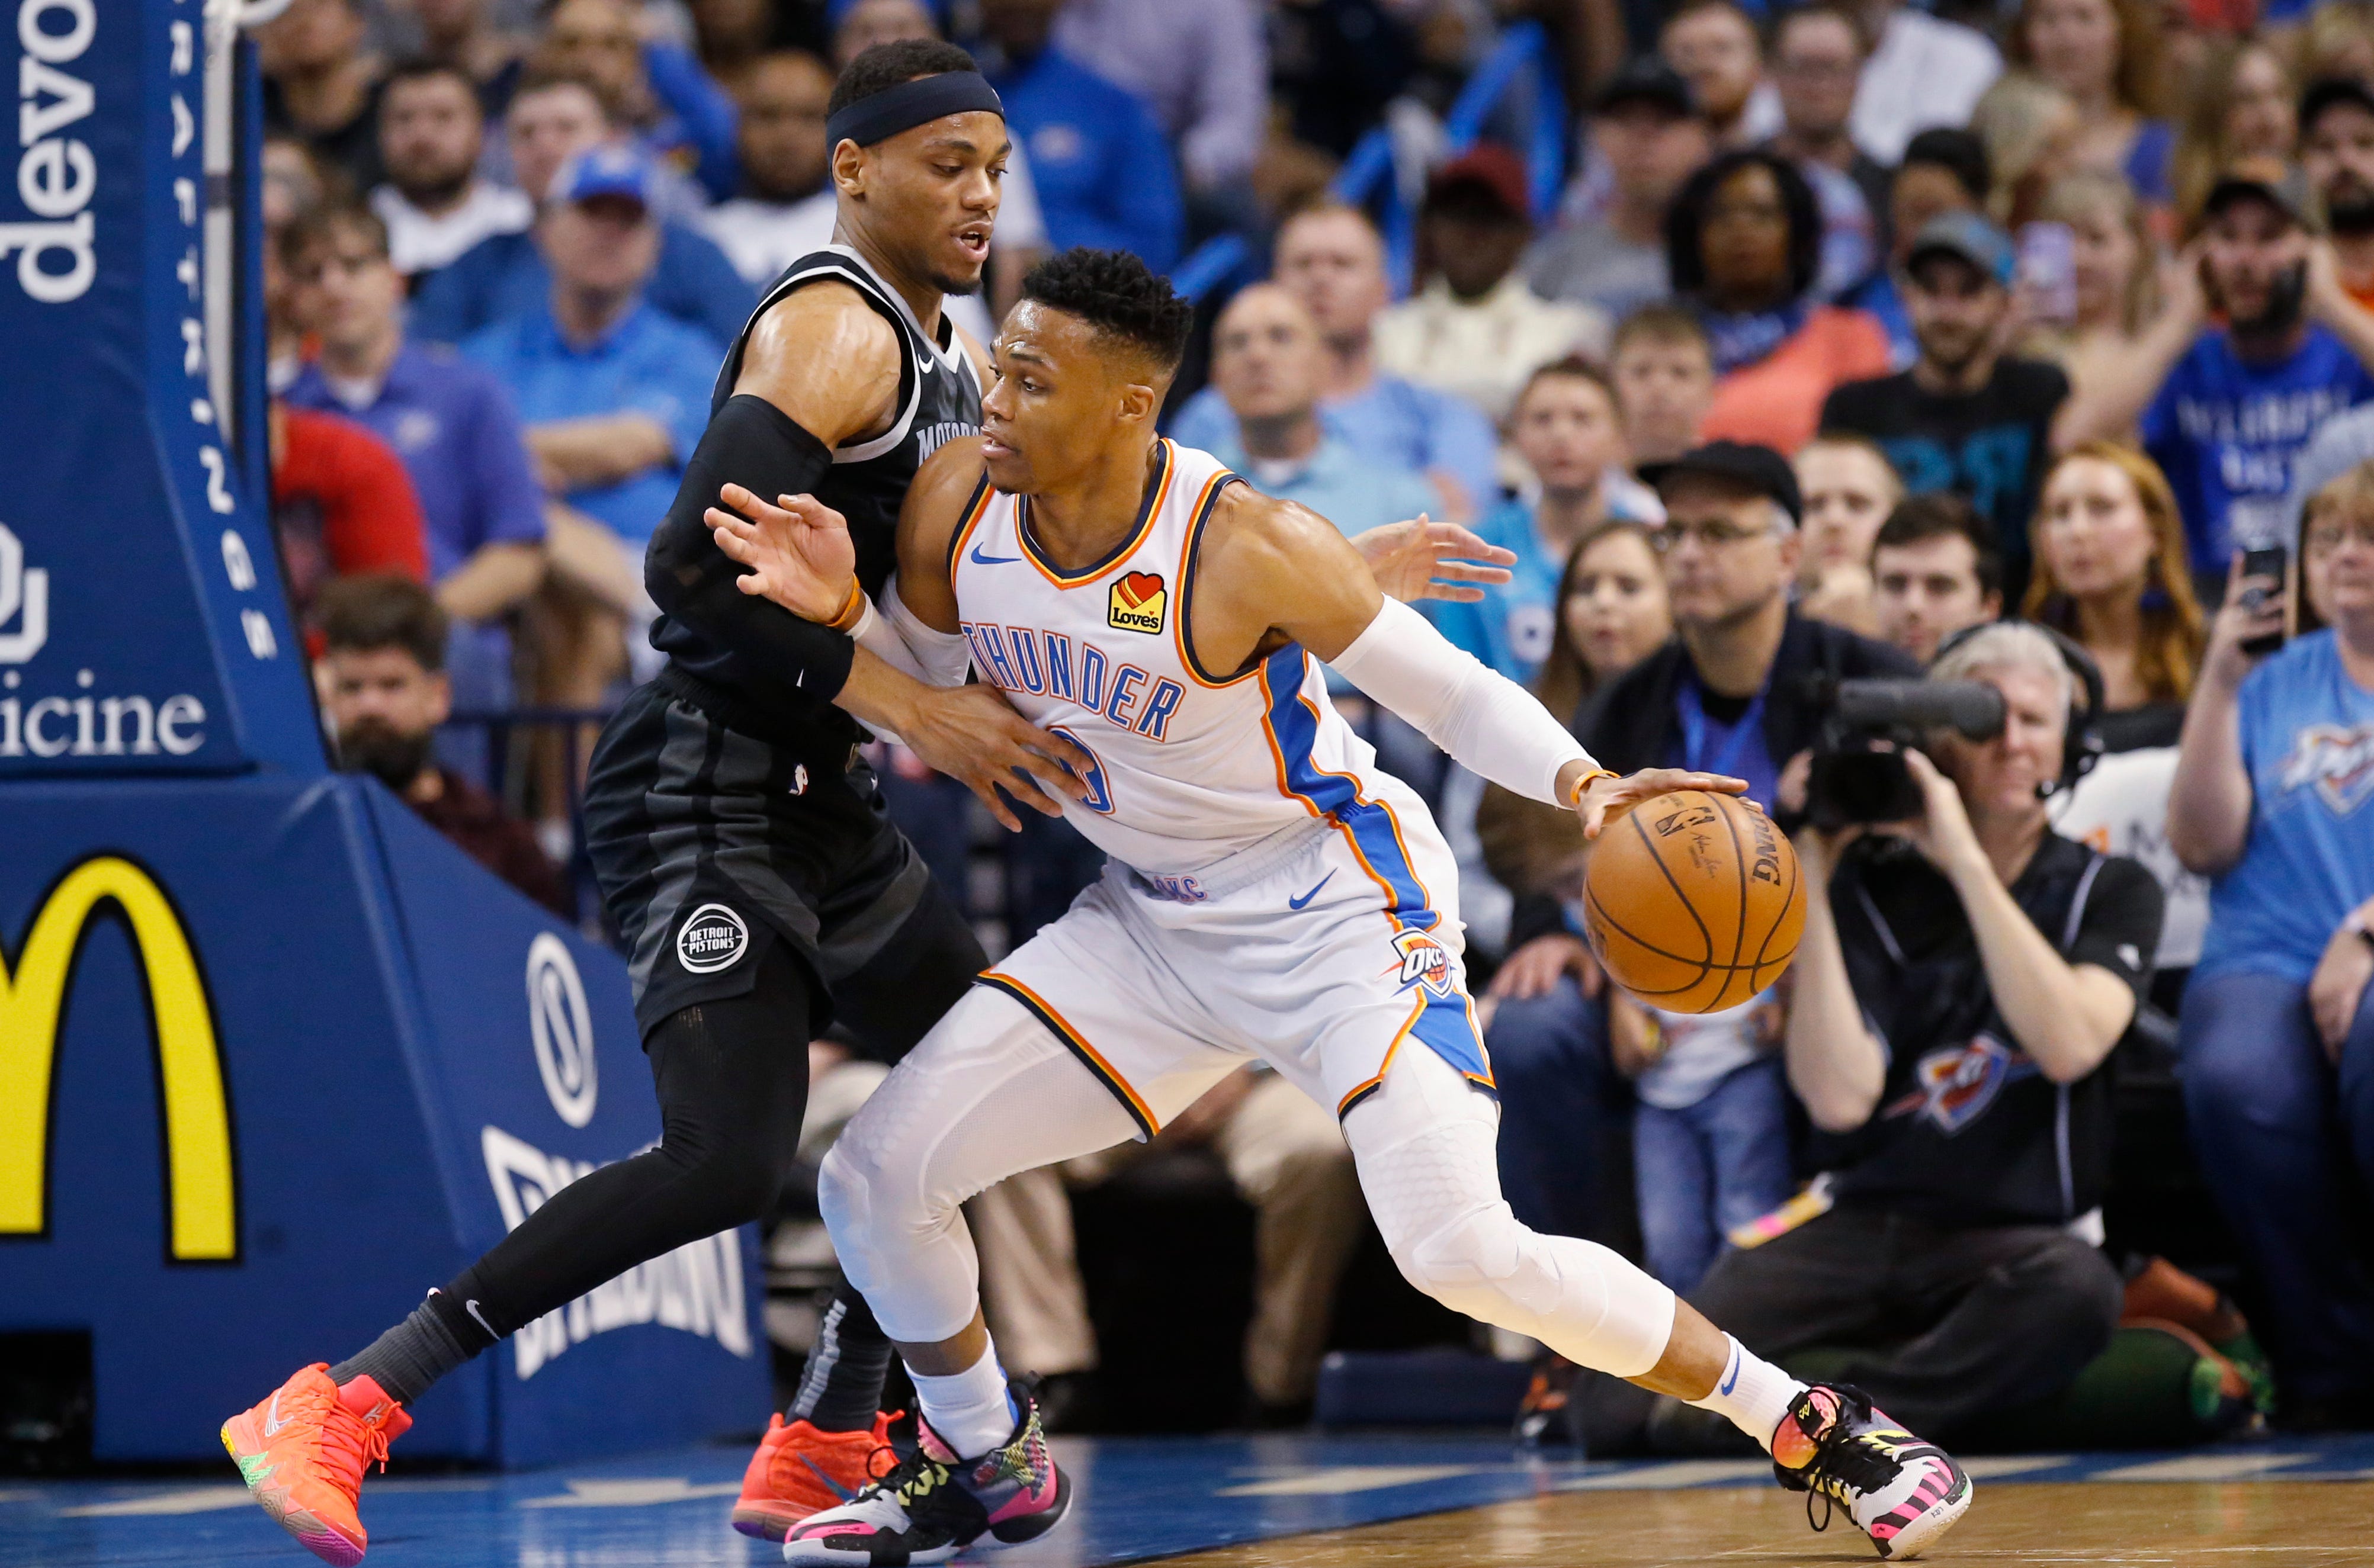 Oklahoma City Thunder guard Russell Westbrook, right, drives against Detroit Pistons guard Bruce Brown during the first half.